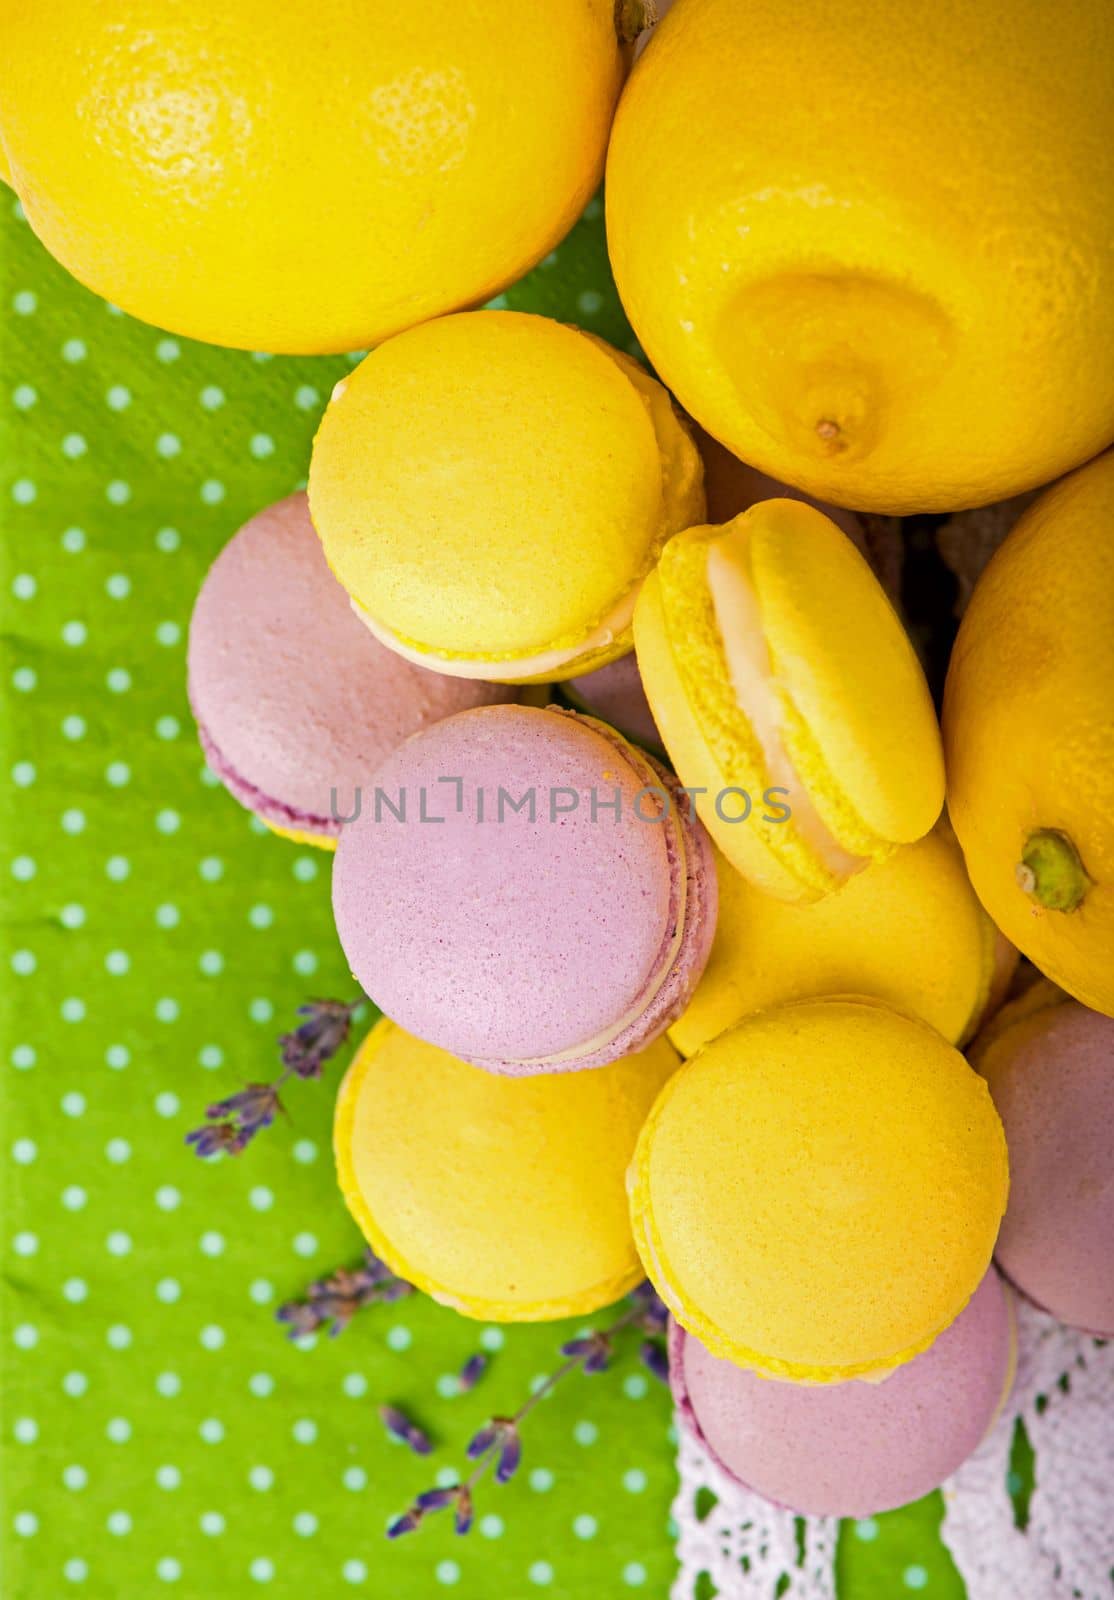 Sweet macaroons on a green napkin, vintage color tone by aprilphoto